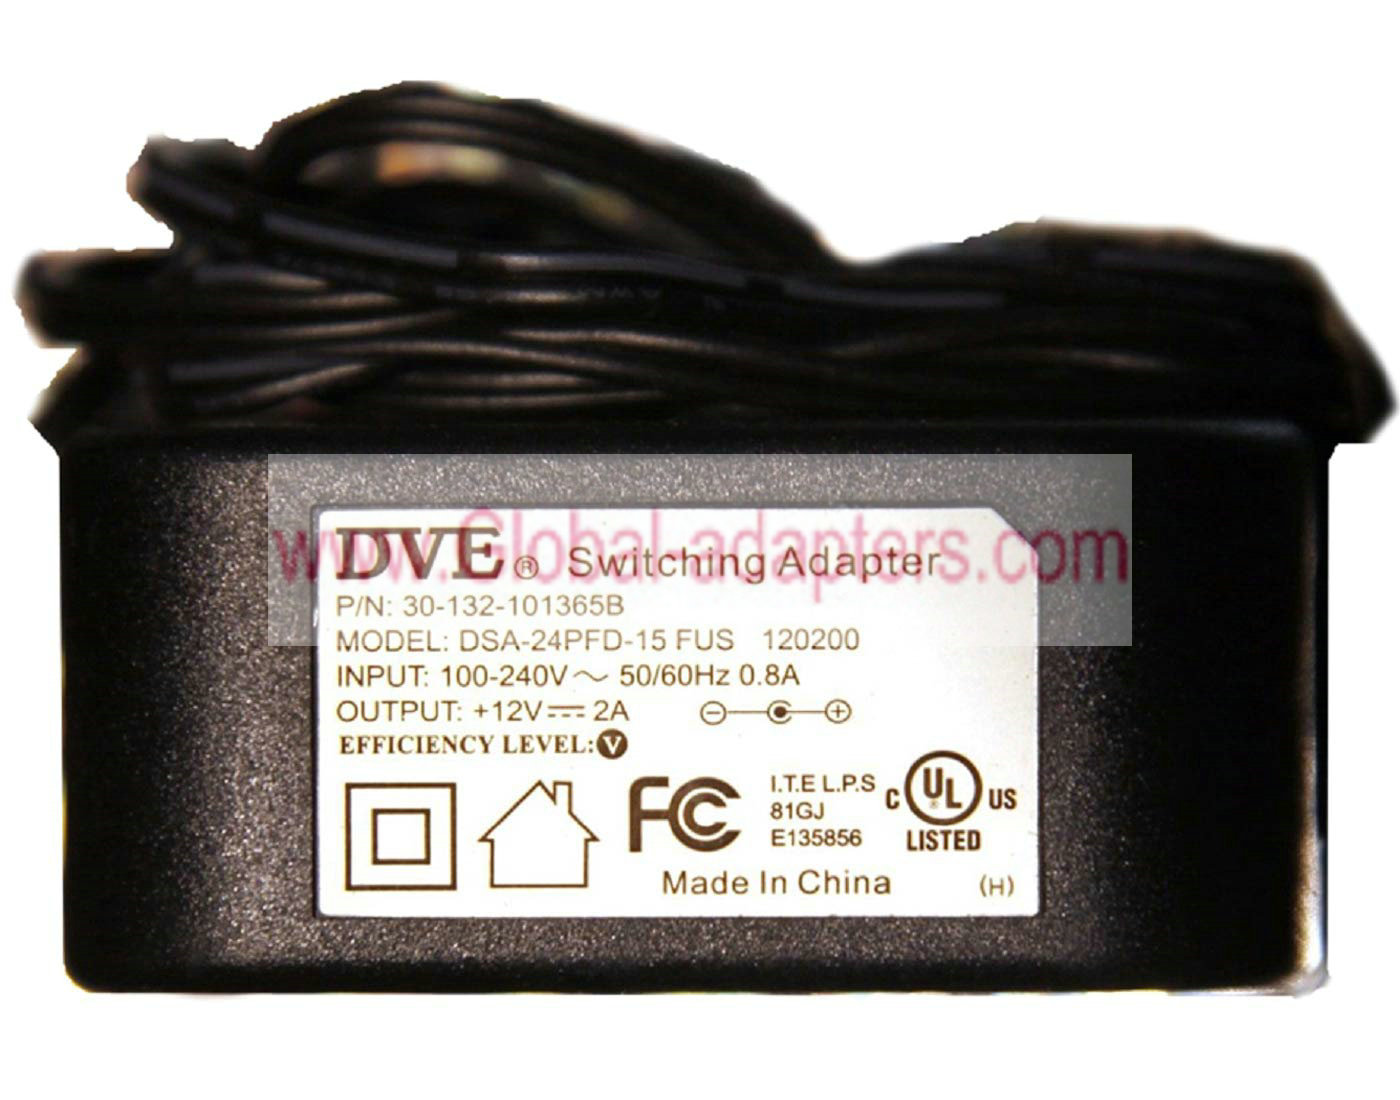 New DSA-24PFD-15 FUS 120200 ac adapter for AT&T 3A-153WU12 Linear 12V 2A